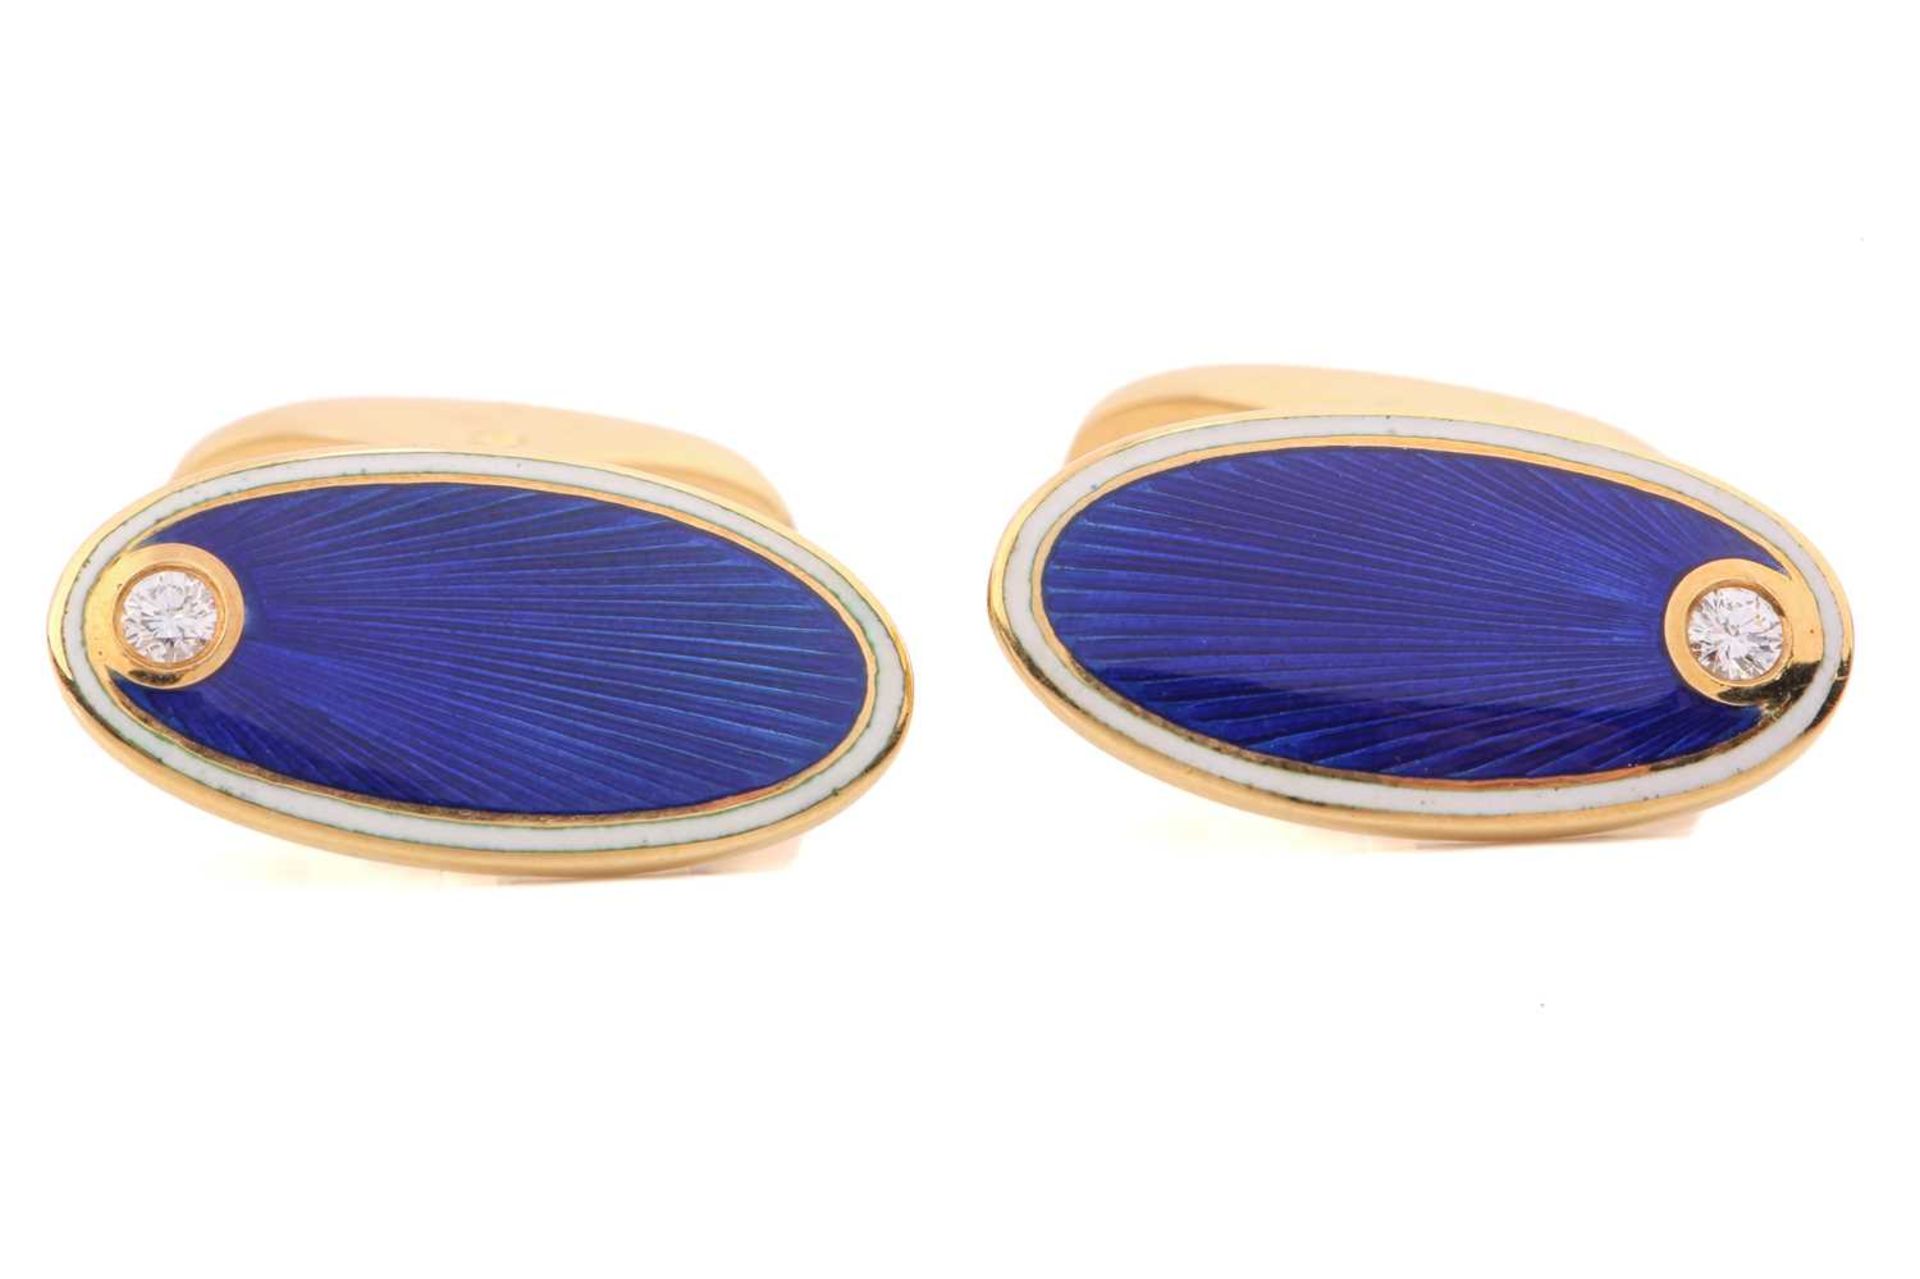 Fabergé - A pair of contemporary enamel cufflinks in 18ct yellow gold, each consisting of an oval